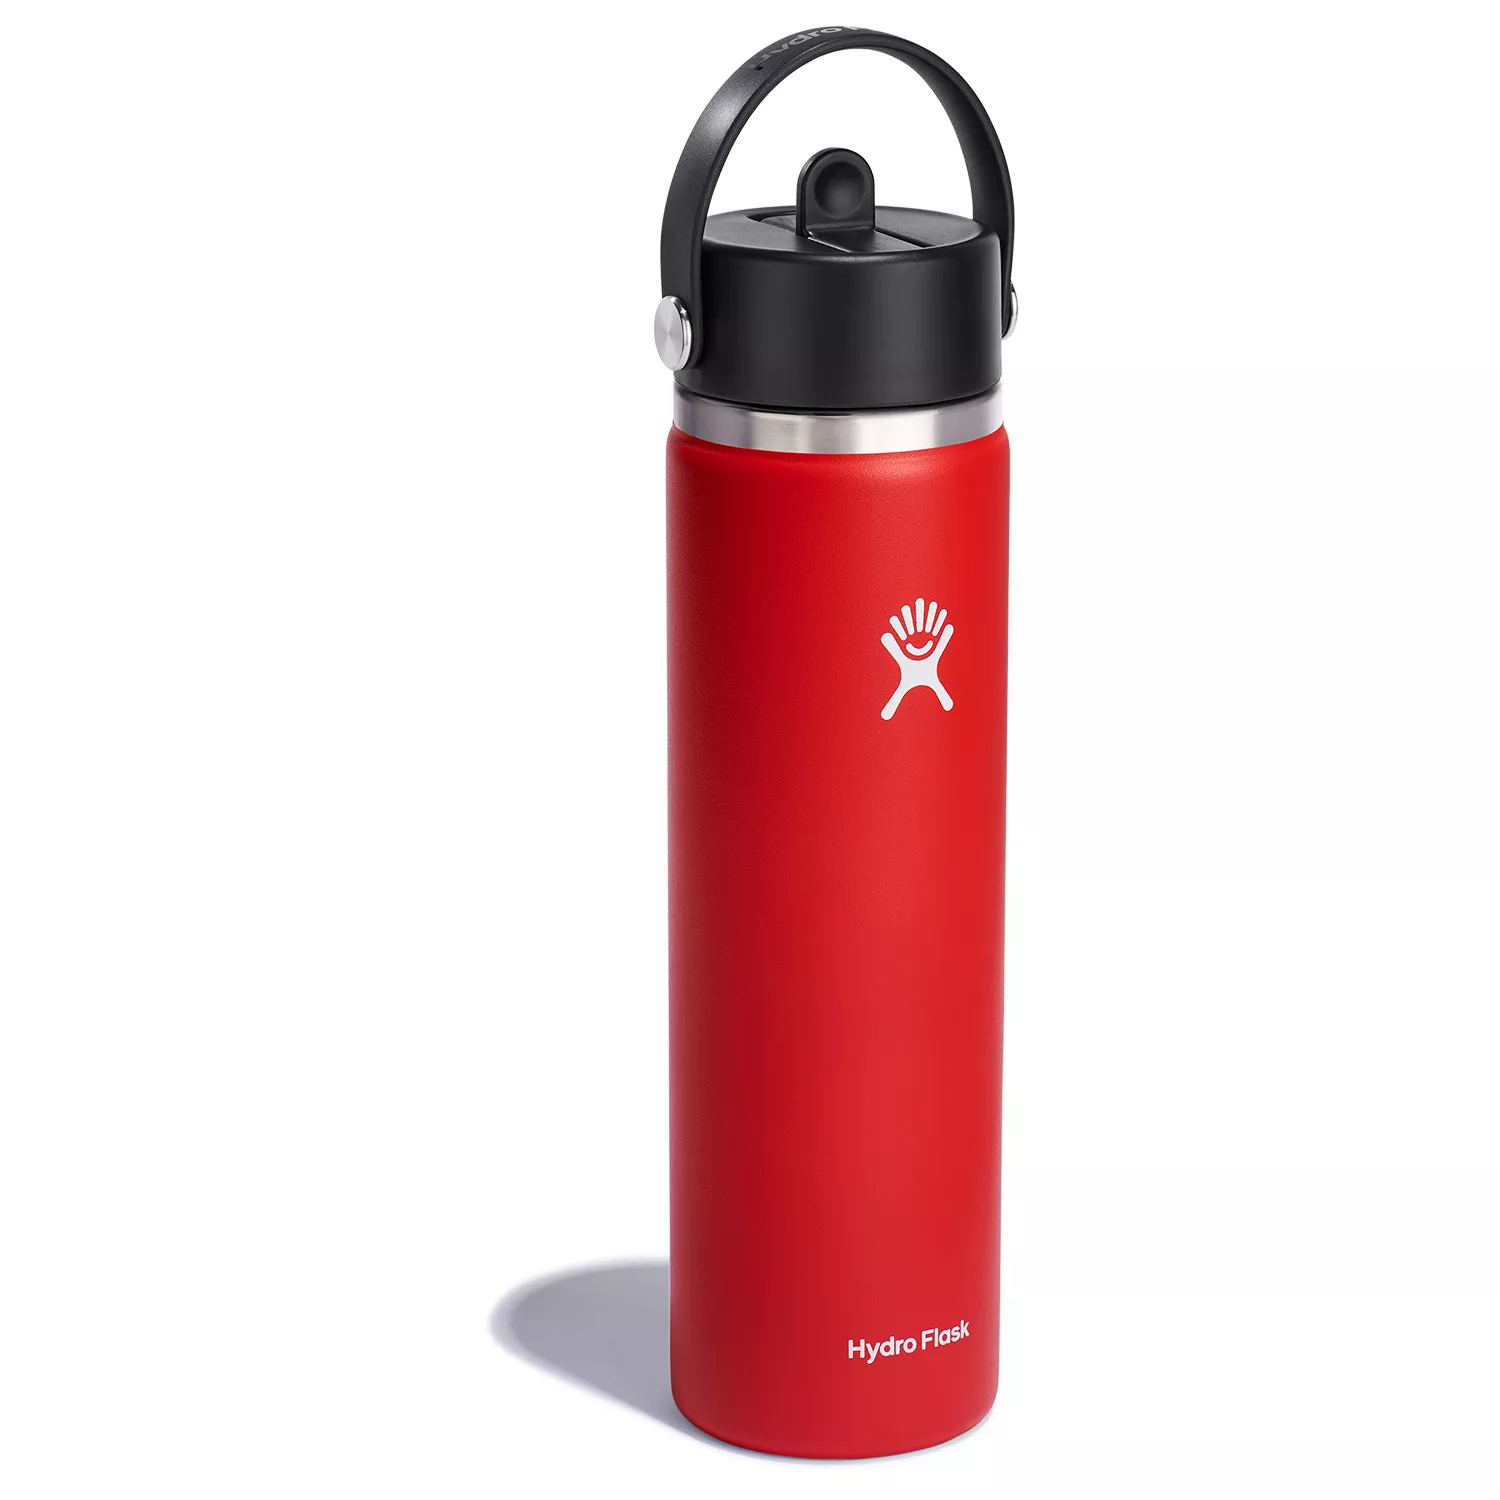 Save up to 50% off Hydro Flask tumblers that keep drinks cold for 24 hours